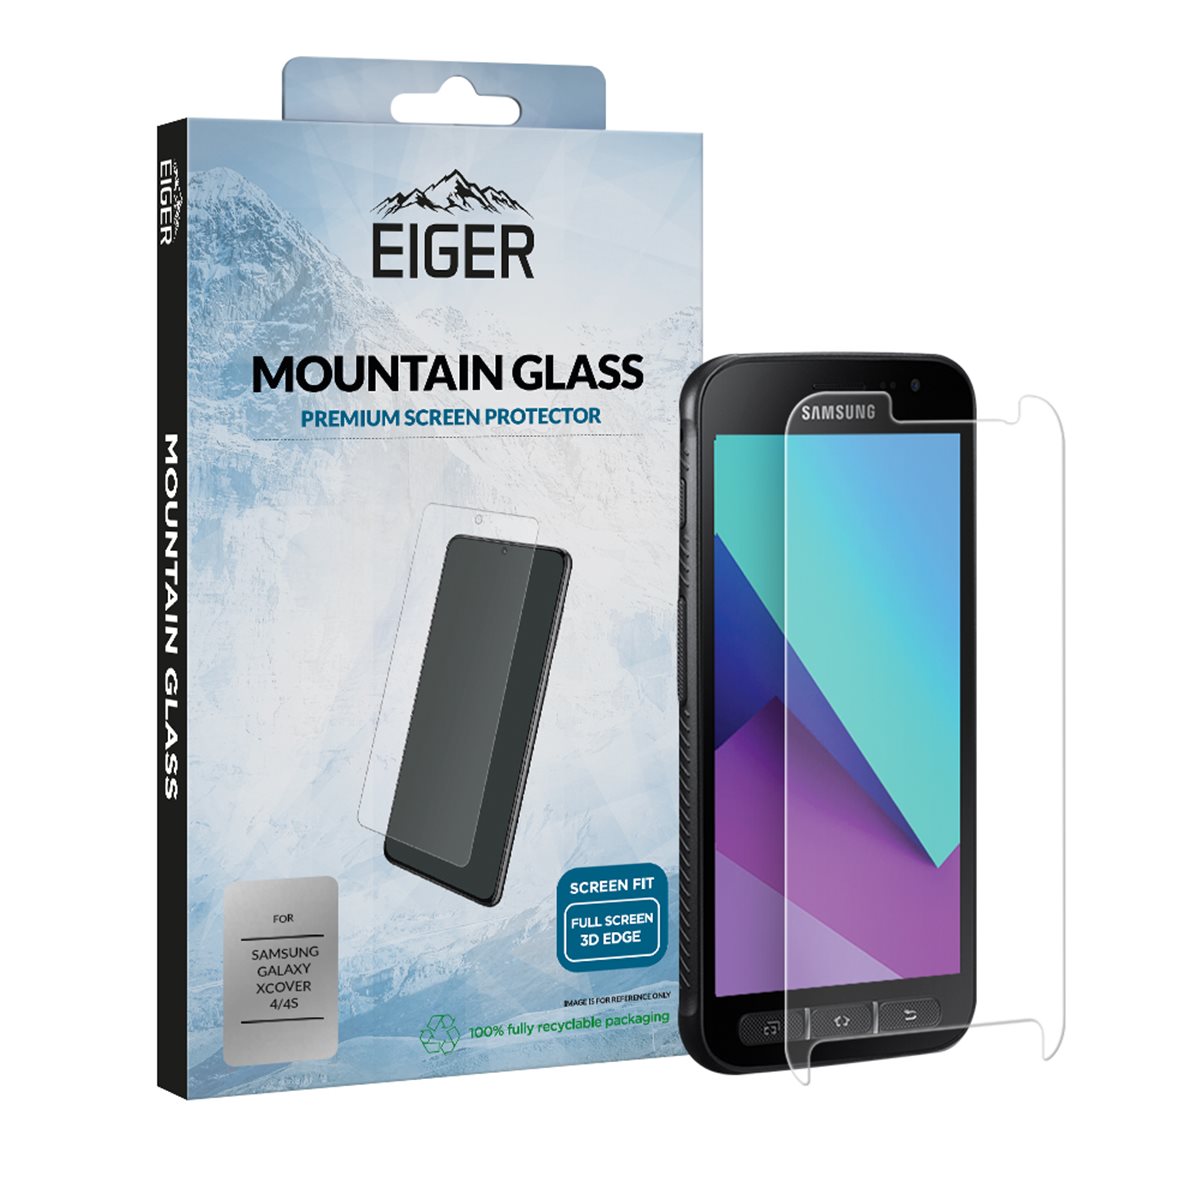 Screen Protection  Eiger Protection - Switzerland